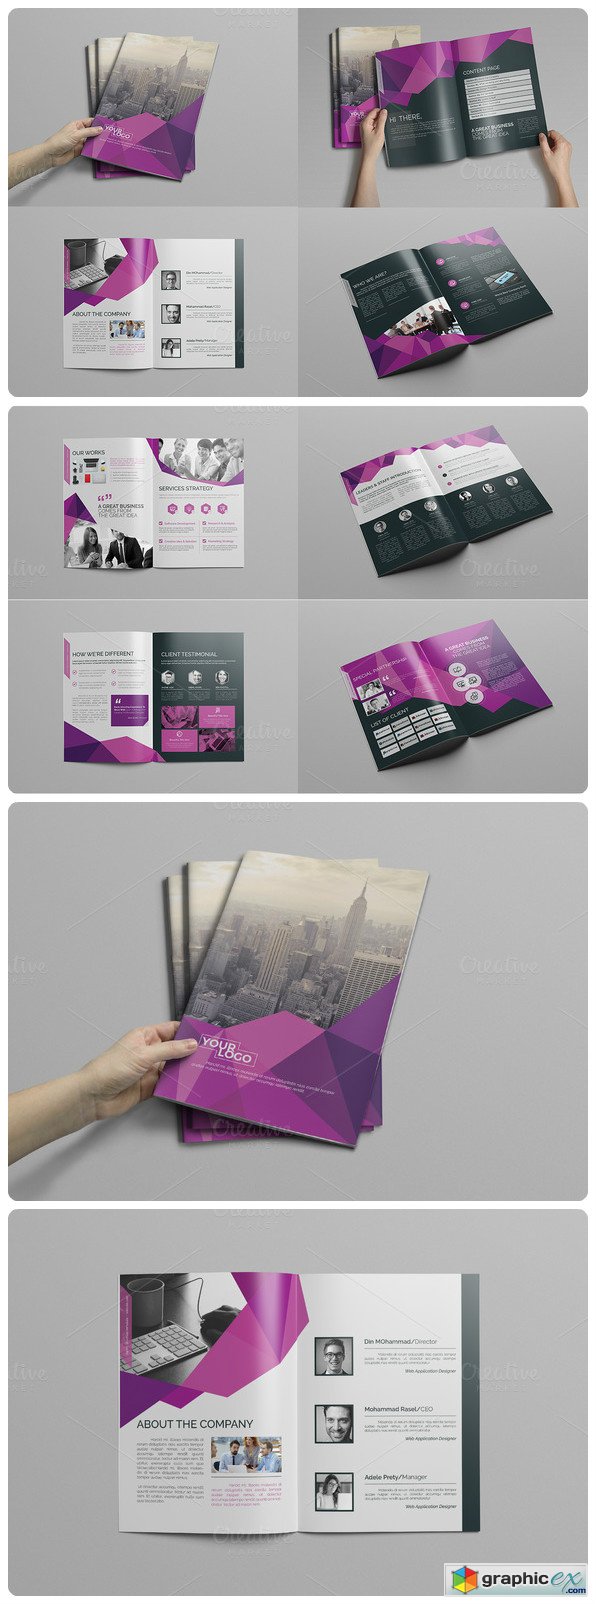 Abstract Bi fold Brochure-16 Pages